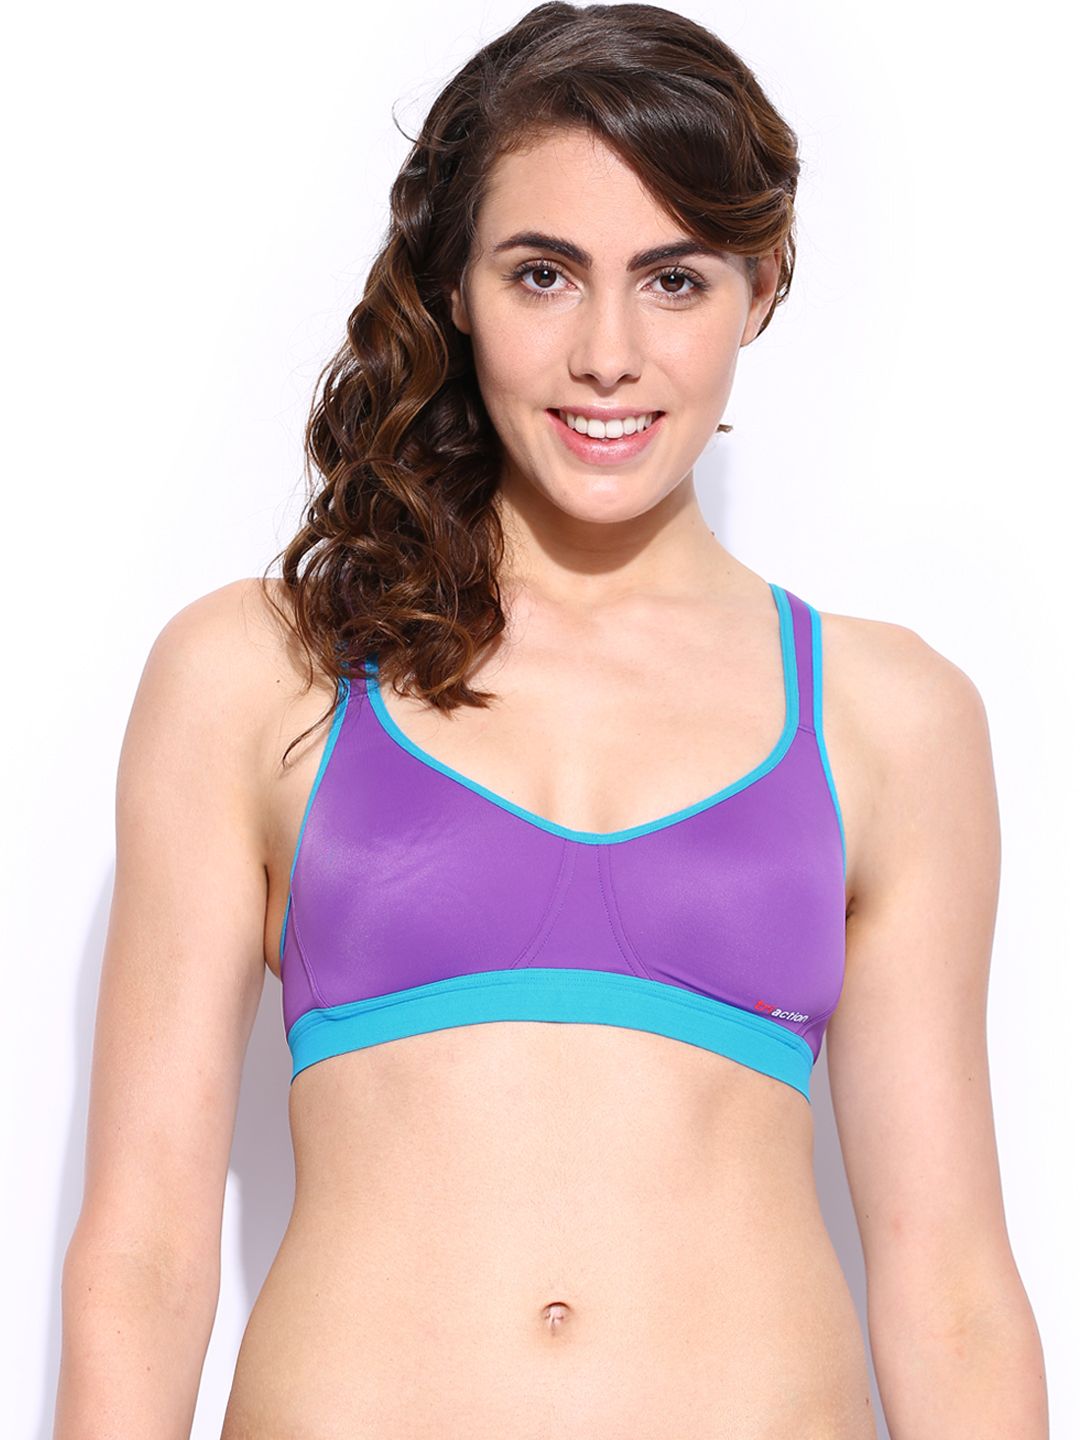 Triumph Triaction 36 Padded Wireless Racer Back High Bounce Control Sports Bra Price in India